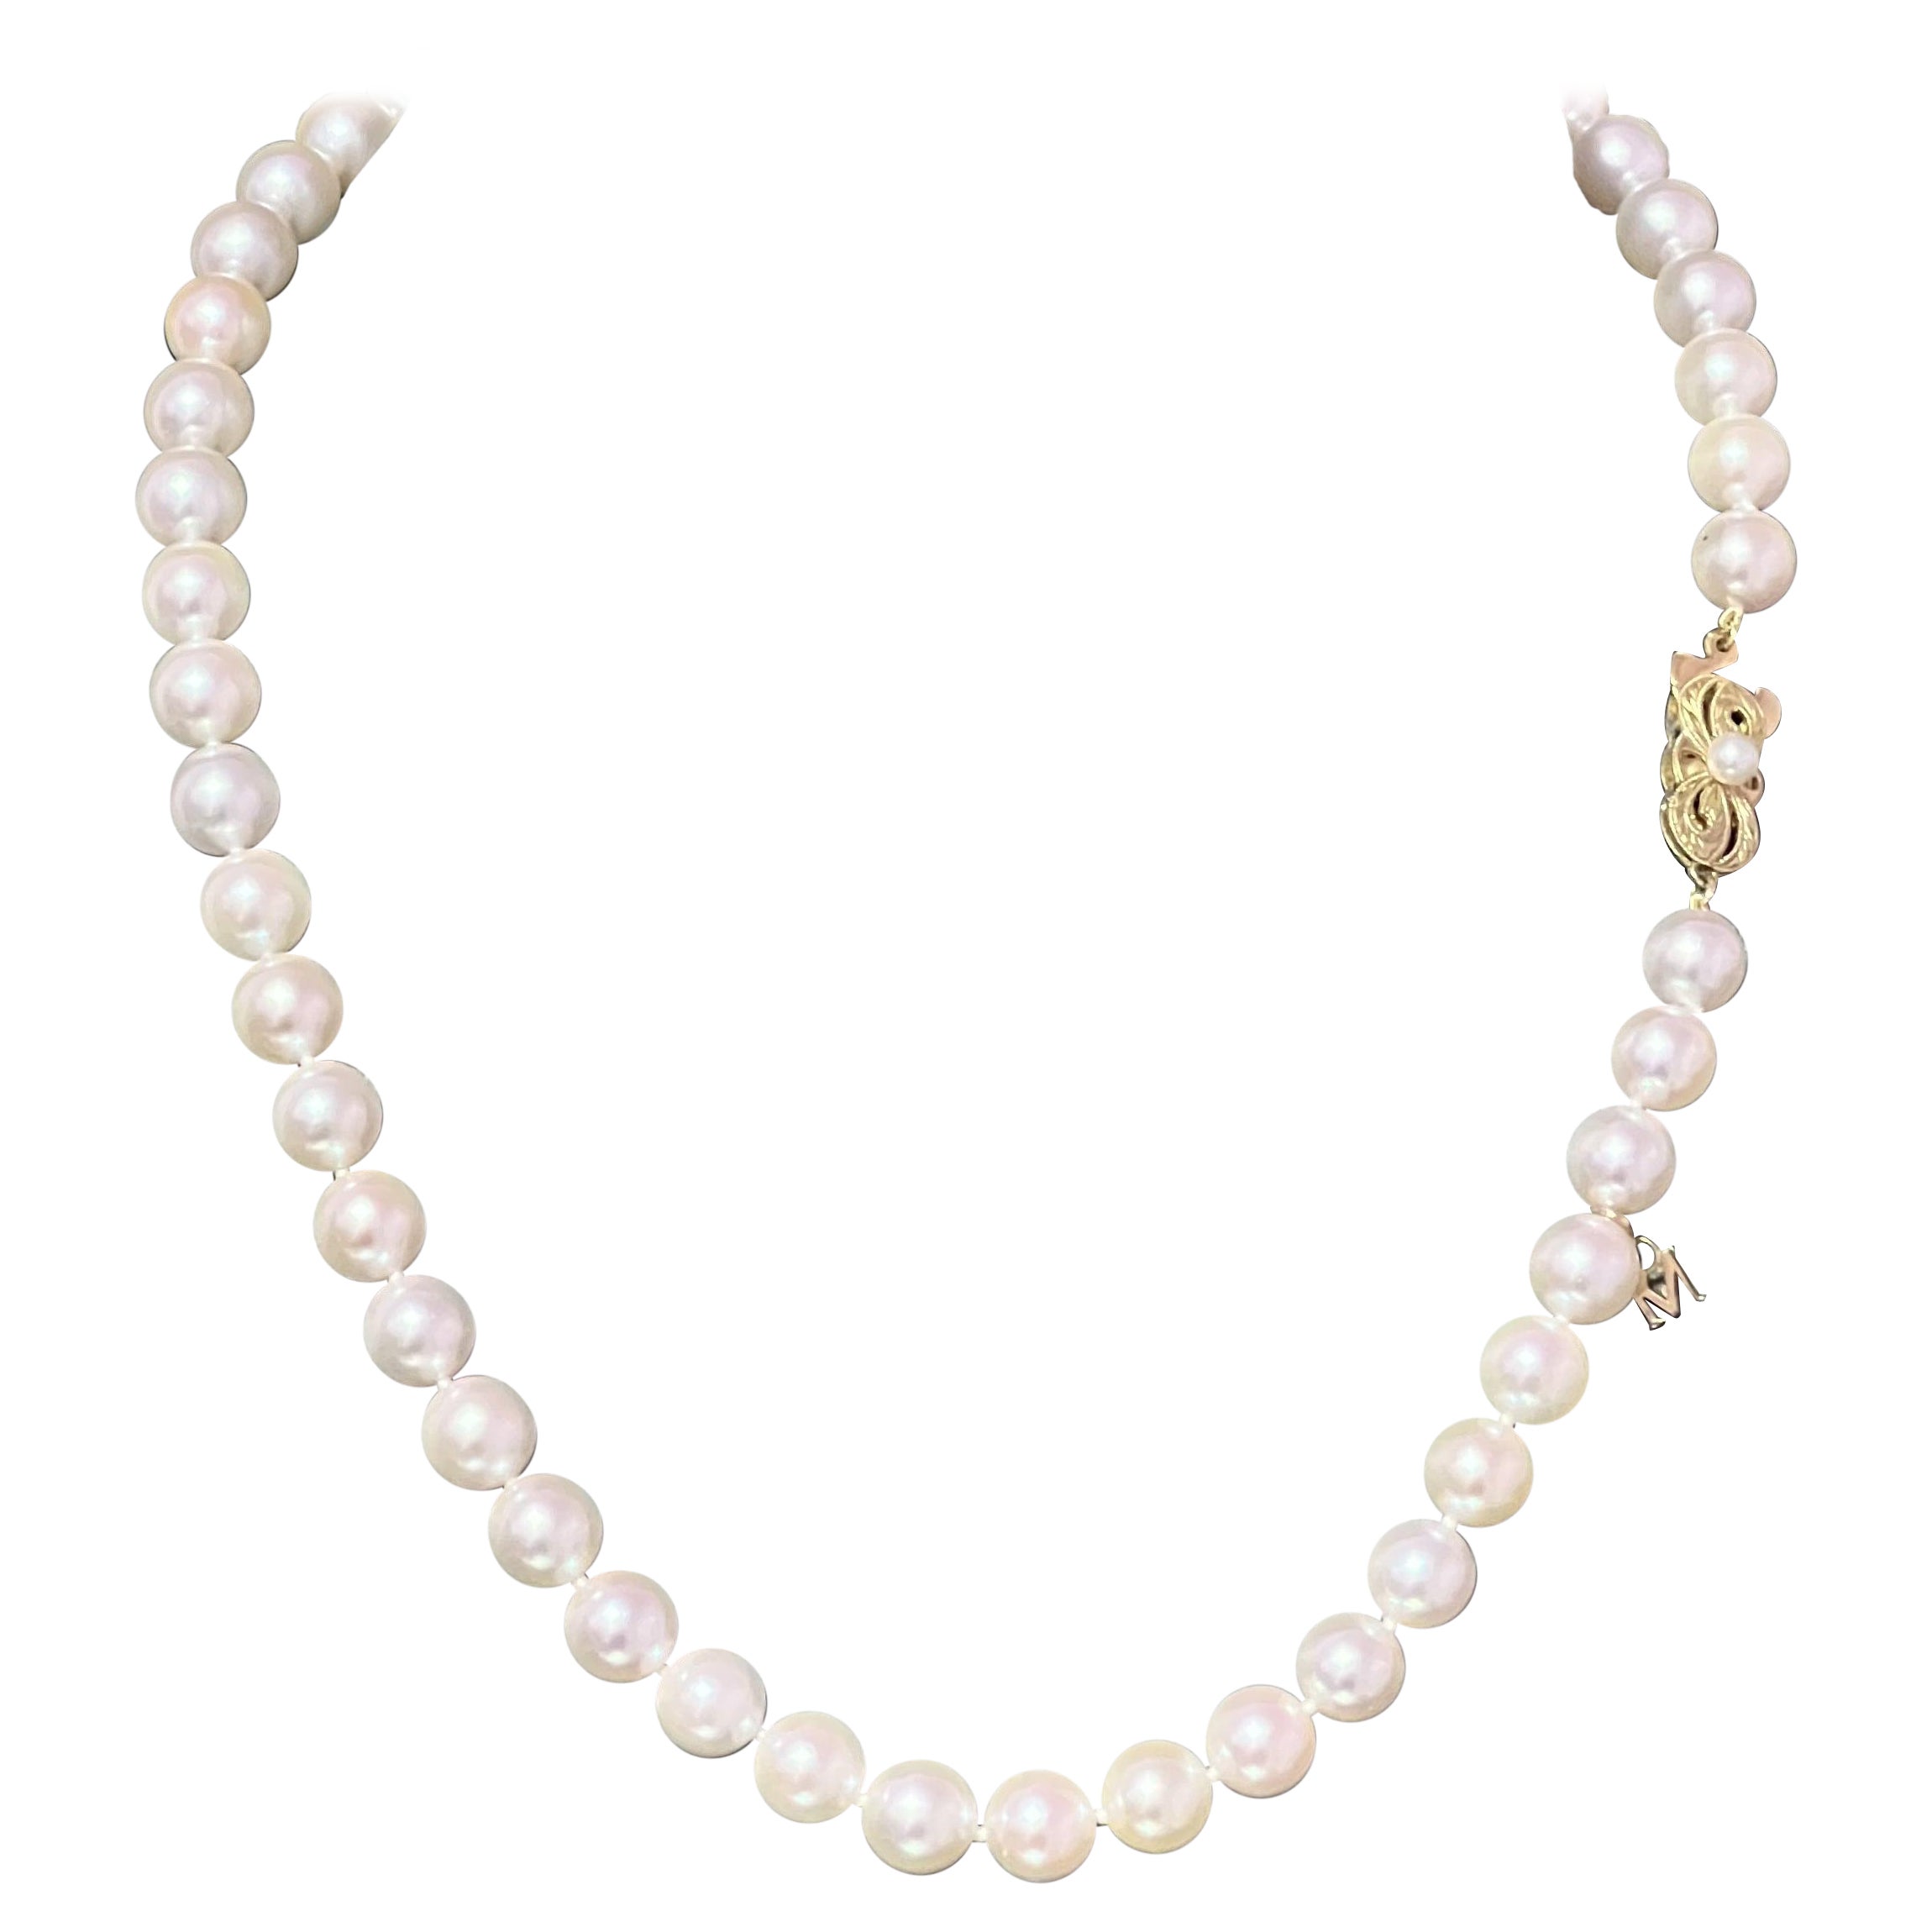 Mikimoto Estate Akoya Pearl Necklace 17" 18k Y Gold 8 mm Certified